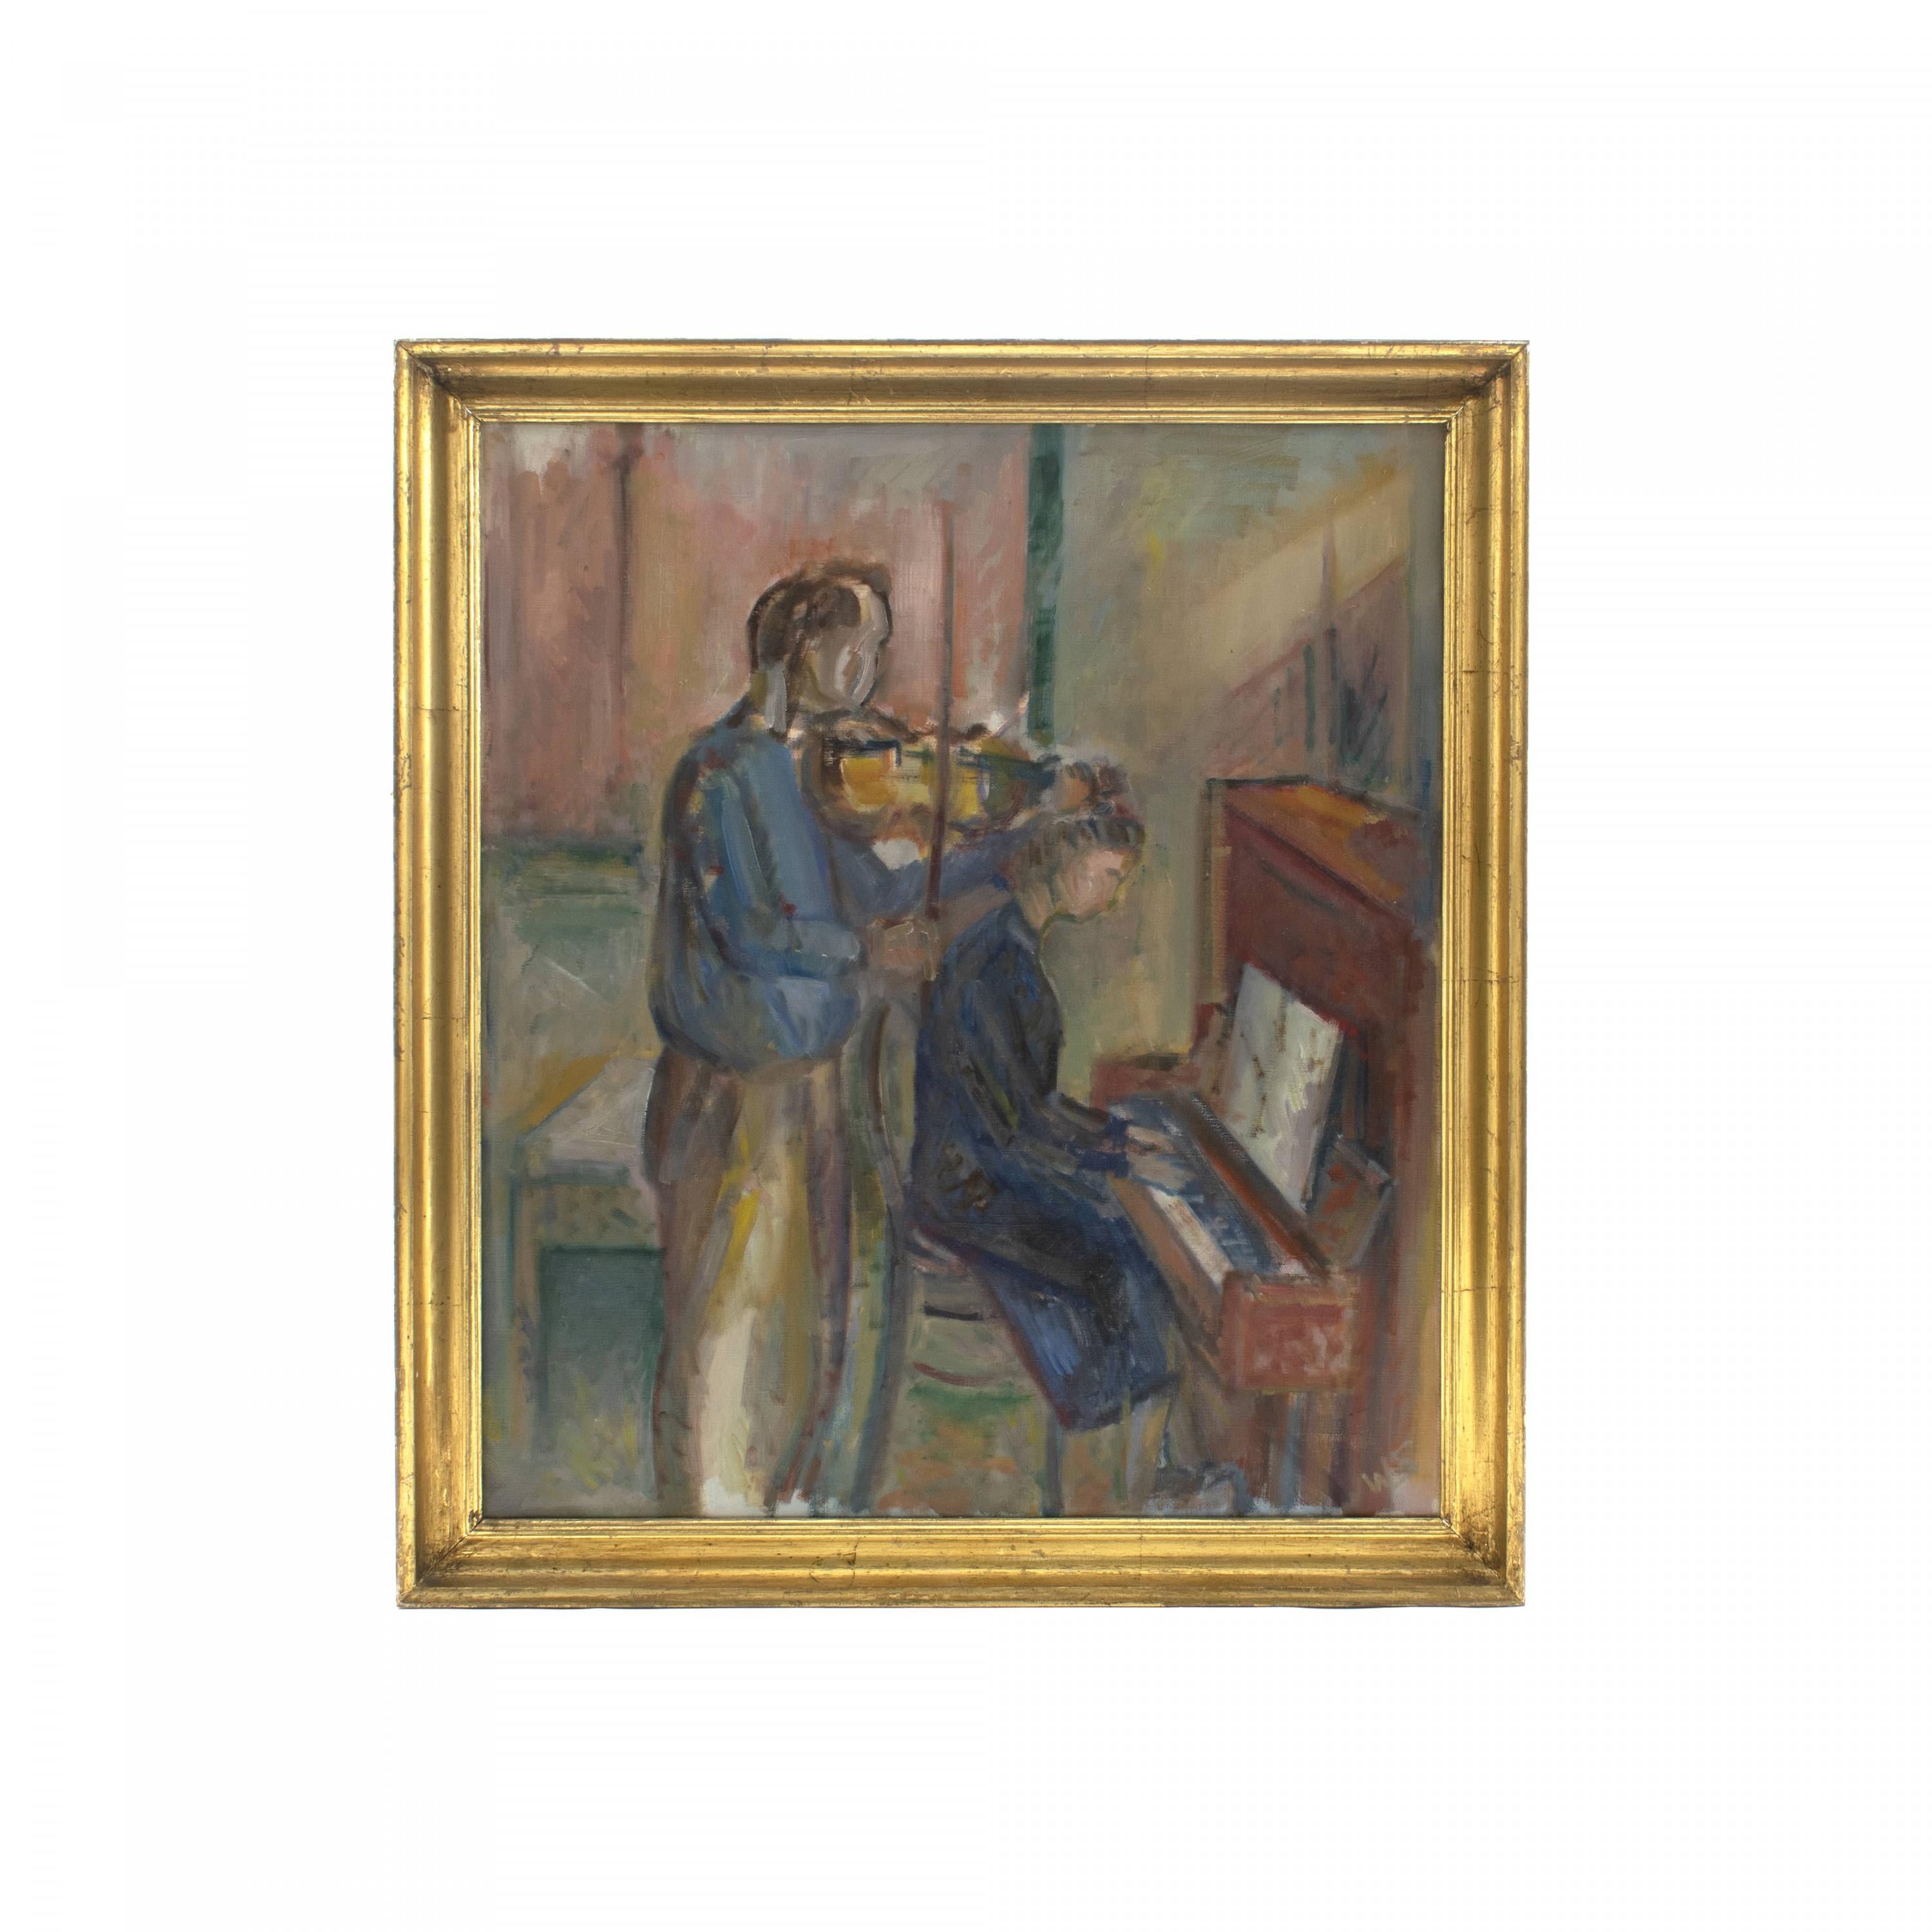 William Scharff 1886-1959.
Couple playing the Violin & piano.
Oil on canvas. In period gilded frame. Size with frame: 53x47 cm.
Signed with monogram: W.S

Measurement (cm) Frame size: H 62 x W 55 - D: 3.